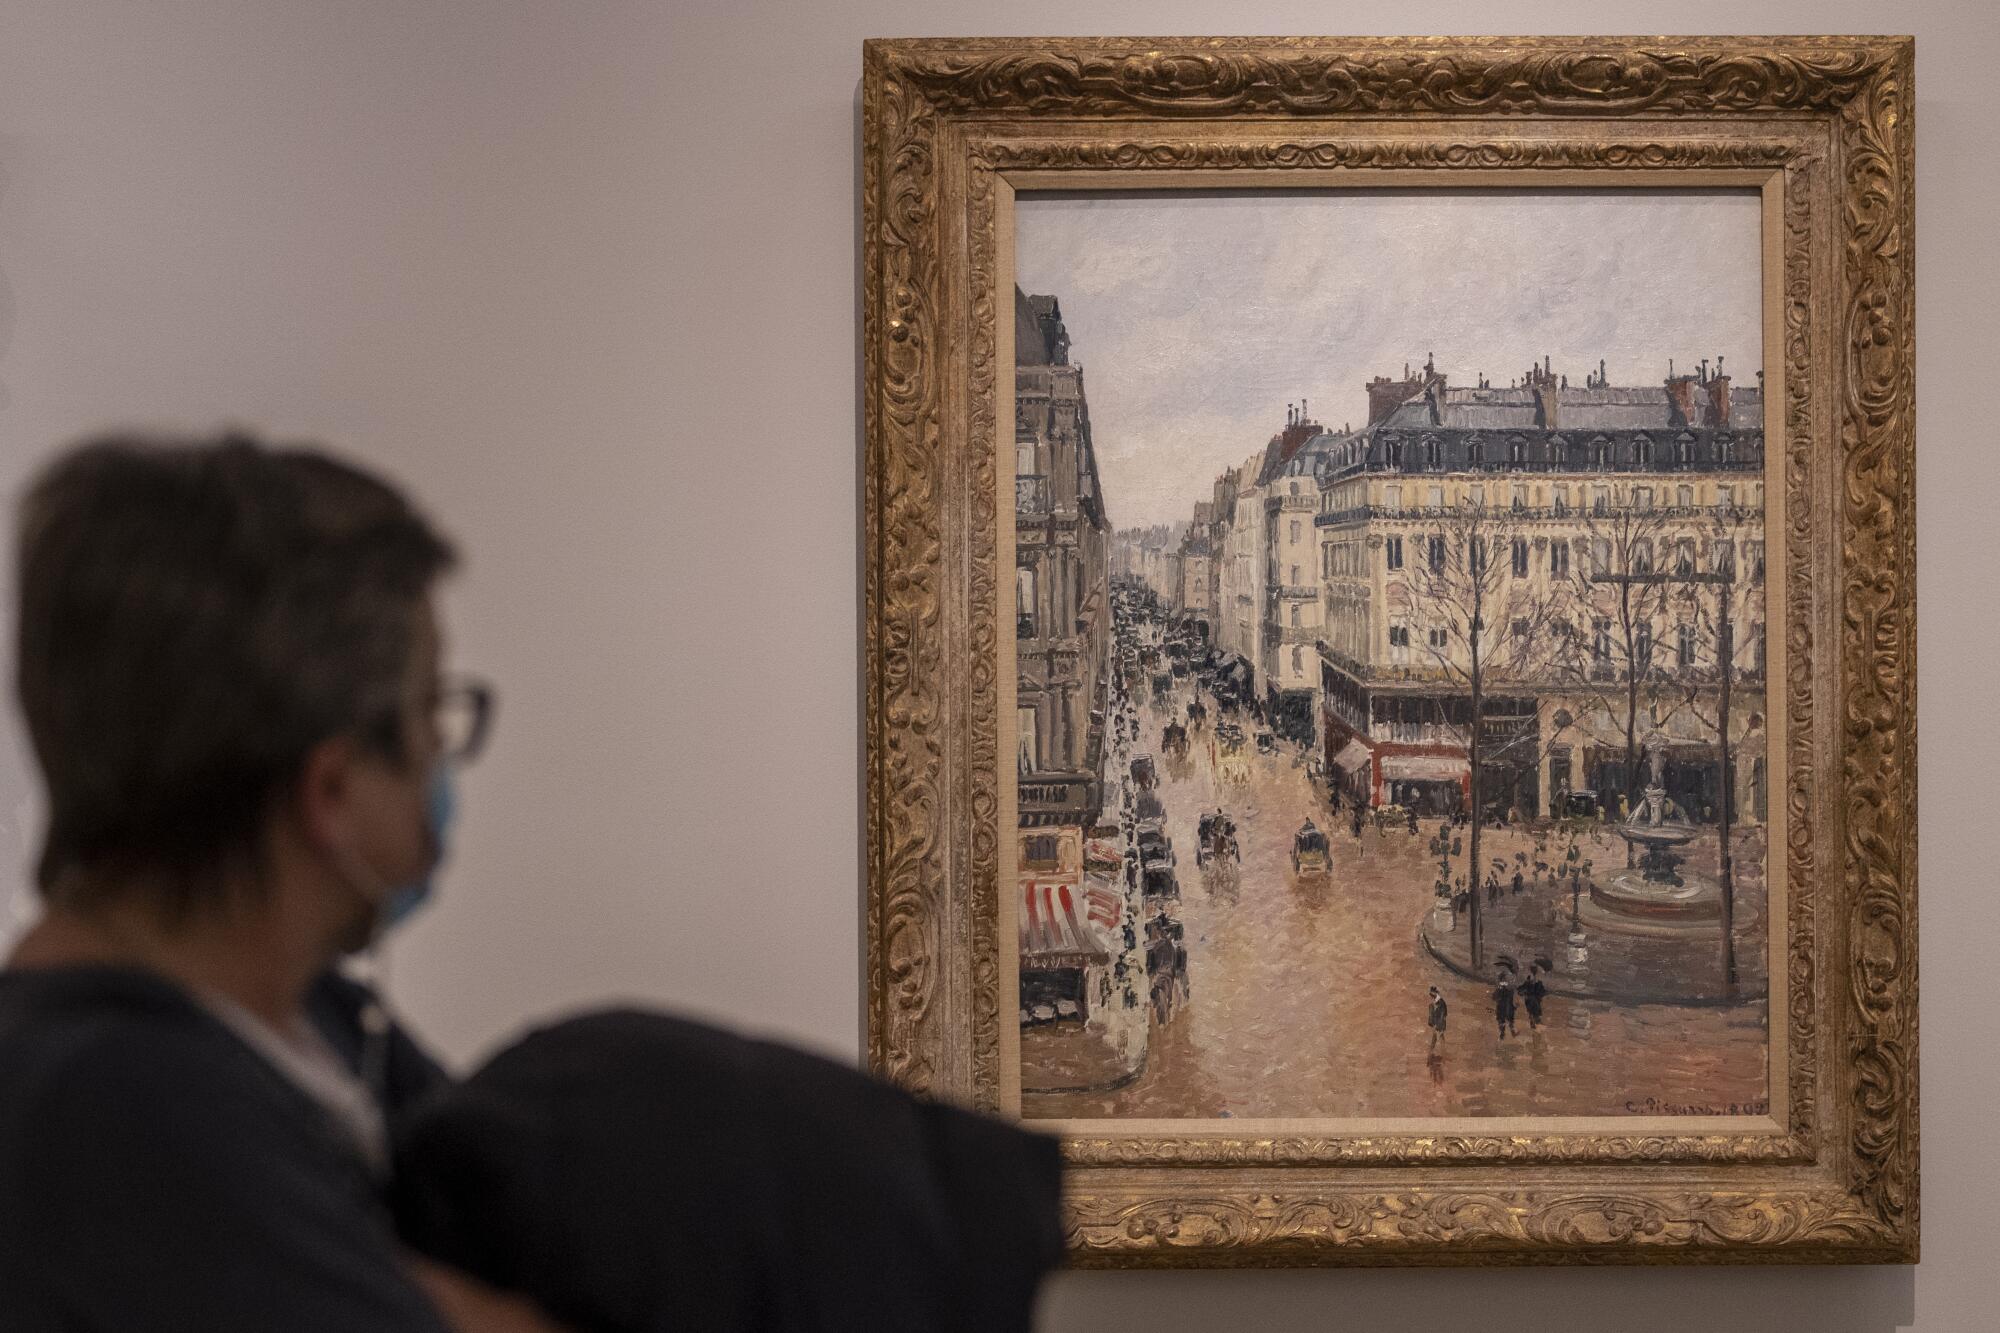 A woman looks at the Impressionist painting called "Rue St.-Honore, Apres-Midi, Effet de Pluie" 